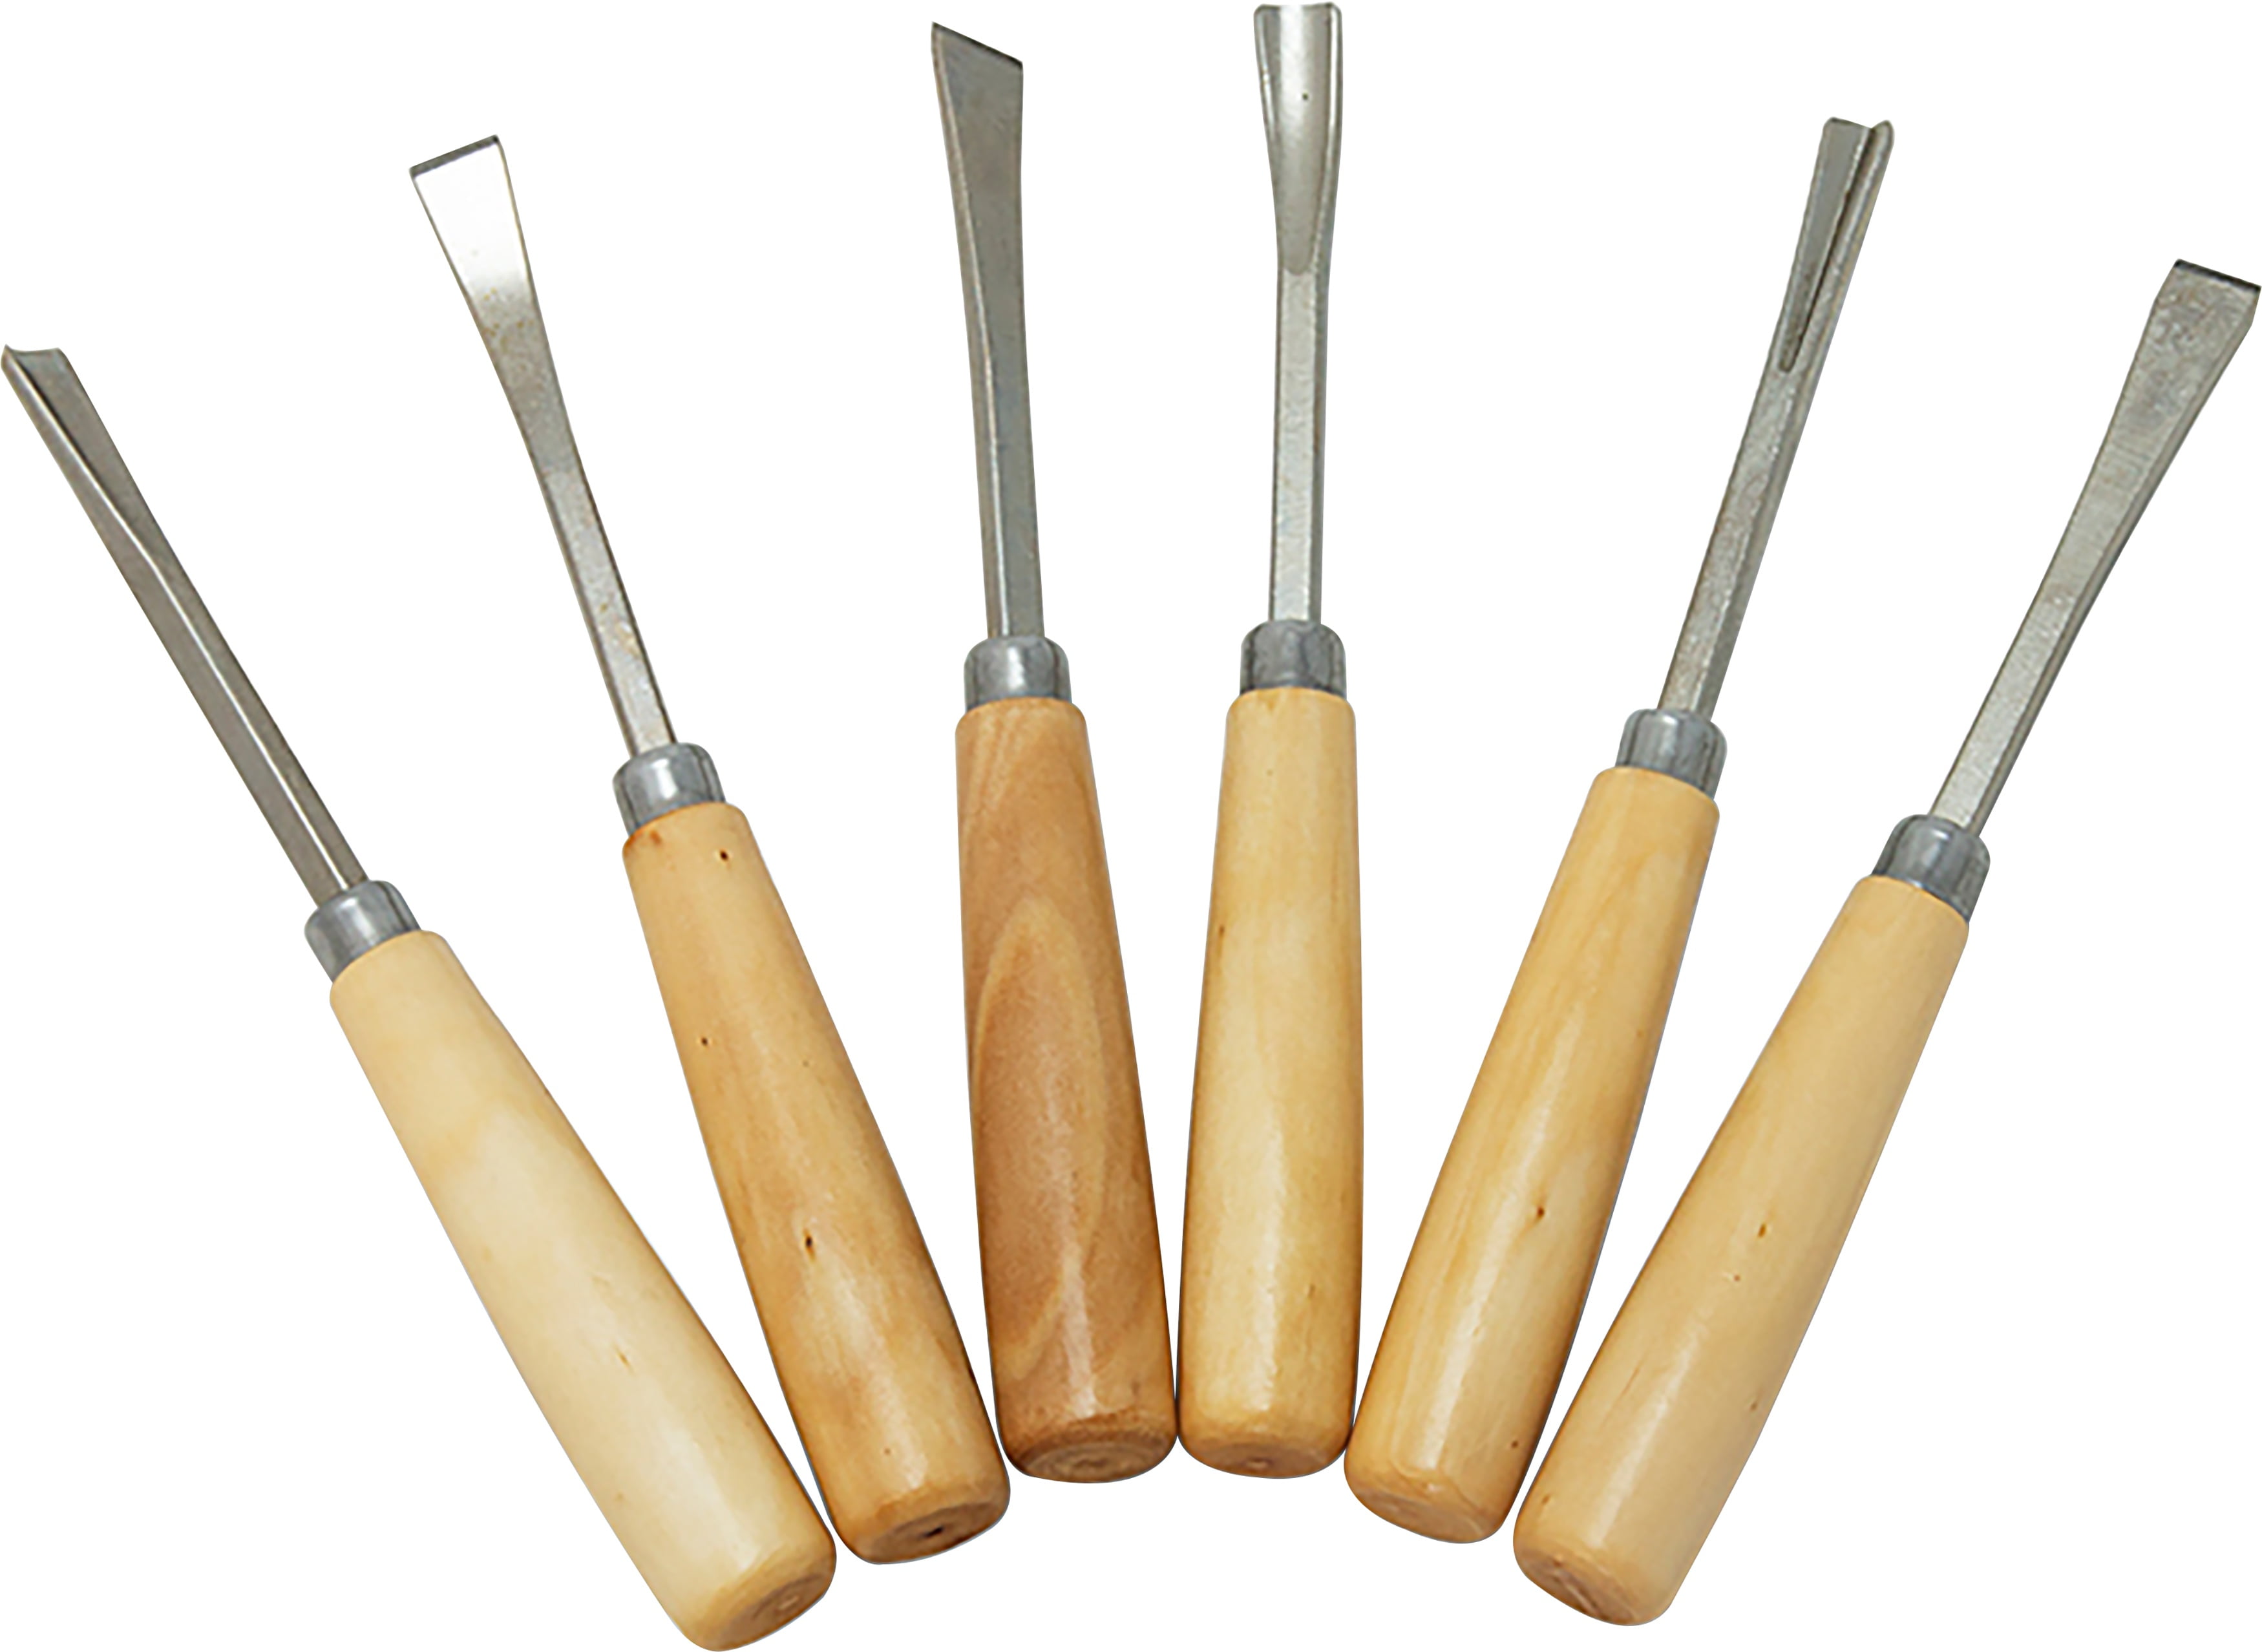 6 Packs: 10 ct. (60 total) Wood Carving Knife Set by ArtMinds™